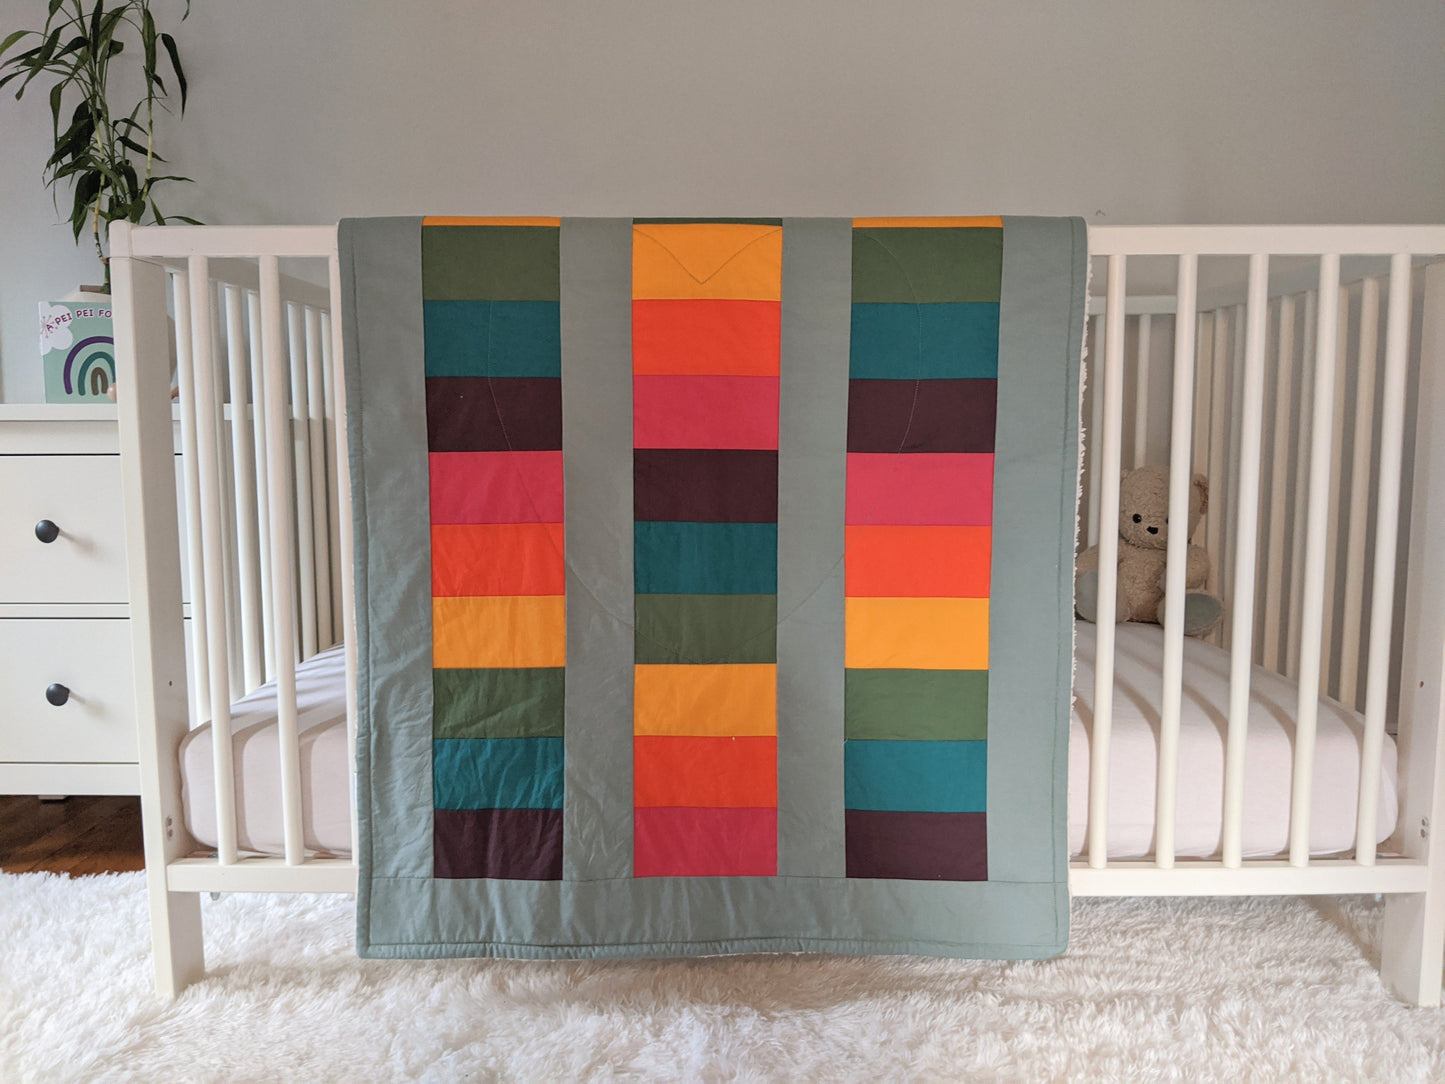 Bright Rainbow on Sage, backed with Fluffy Sherpa, Original, hangs over the side of a crib in a nursery